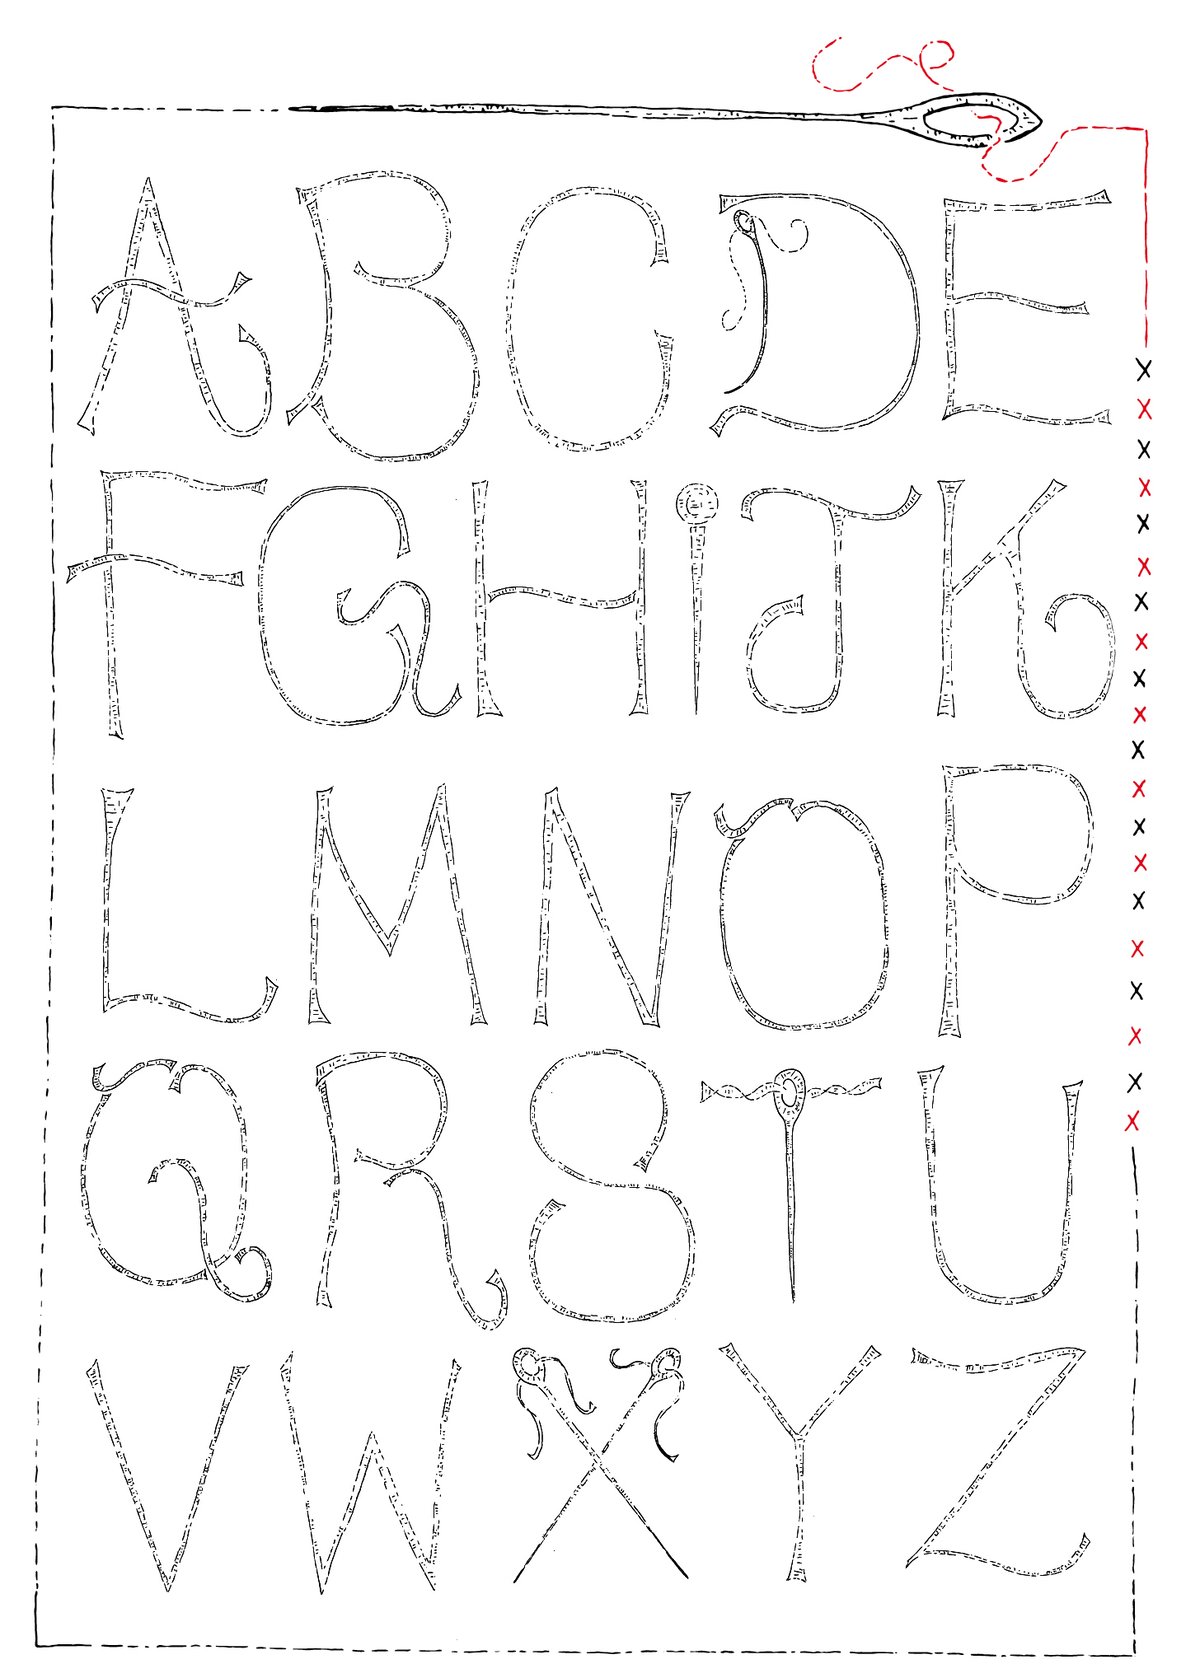 Image of Alphabet (Digital Uppercase Tracing Templates)